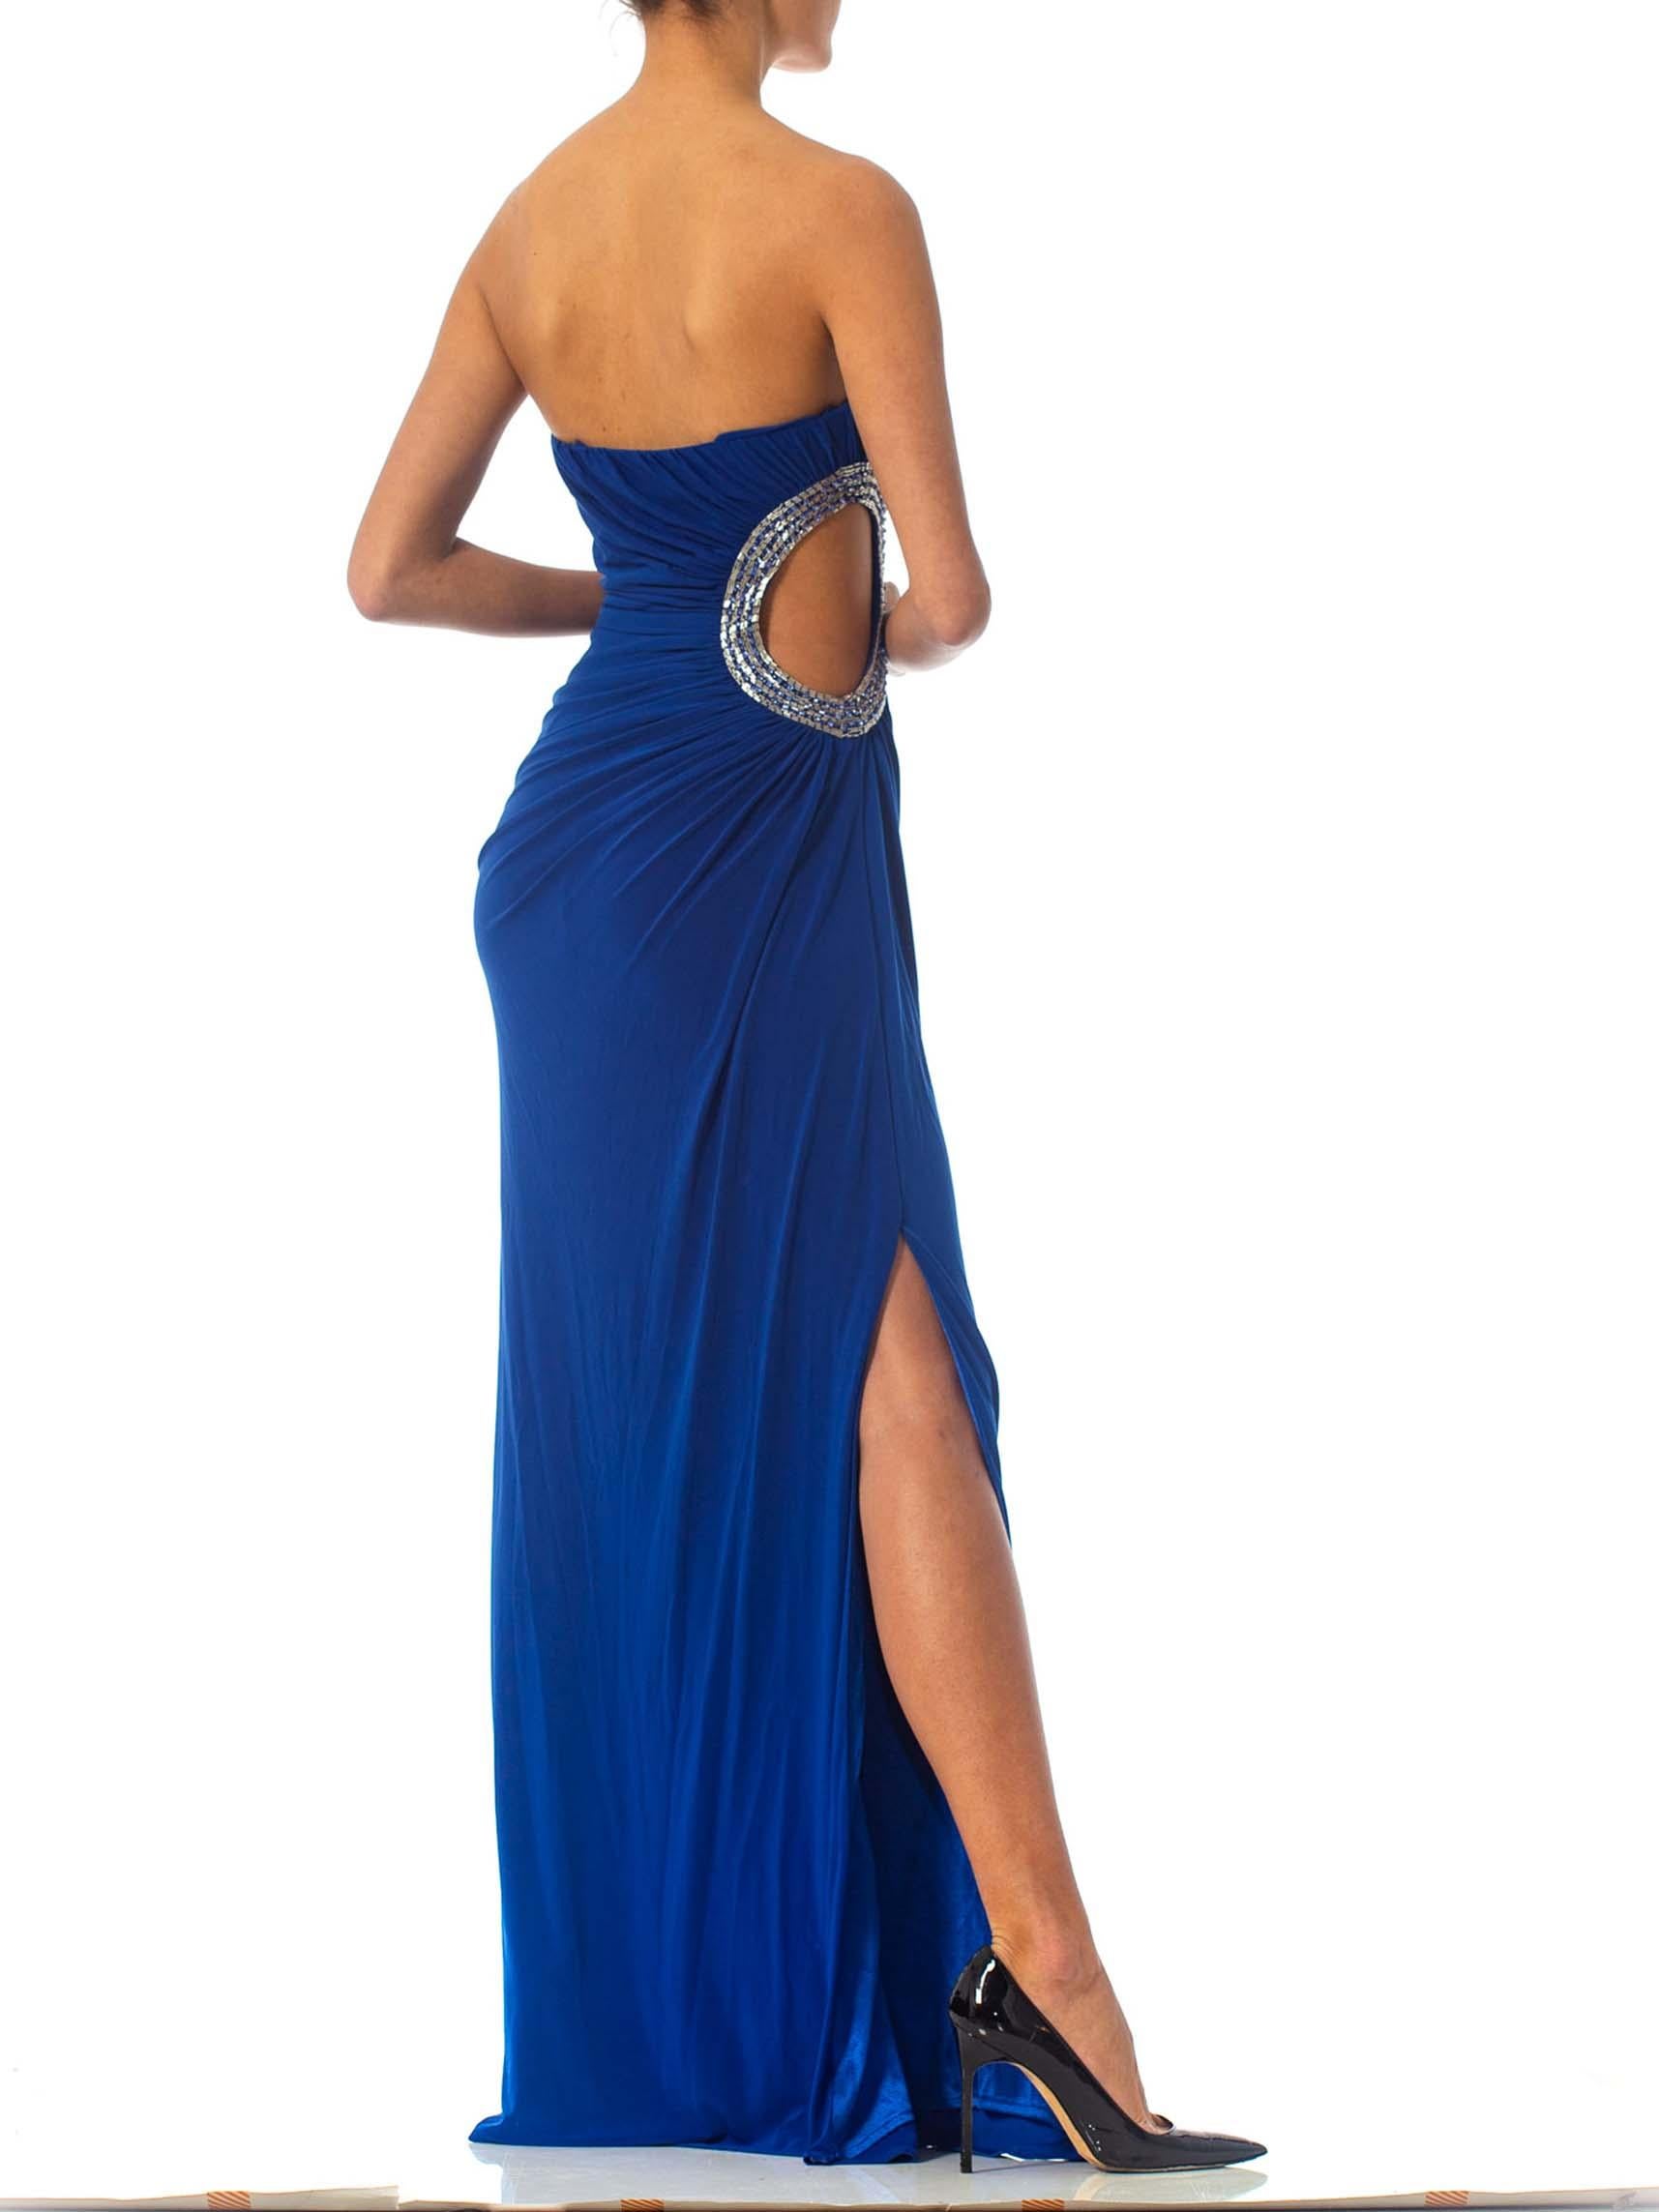 Women's 1990S Cobalt Blue Strapless Poly Blend Jersey Gown With Crystal Cut-Out Side For Sale